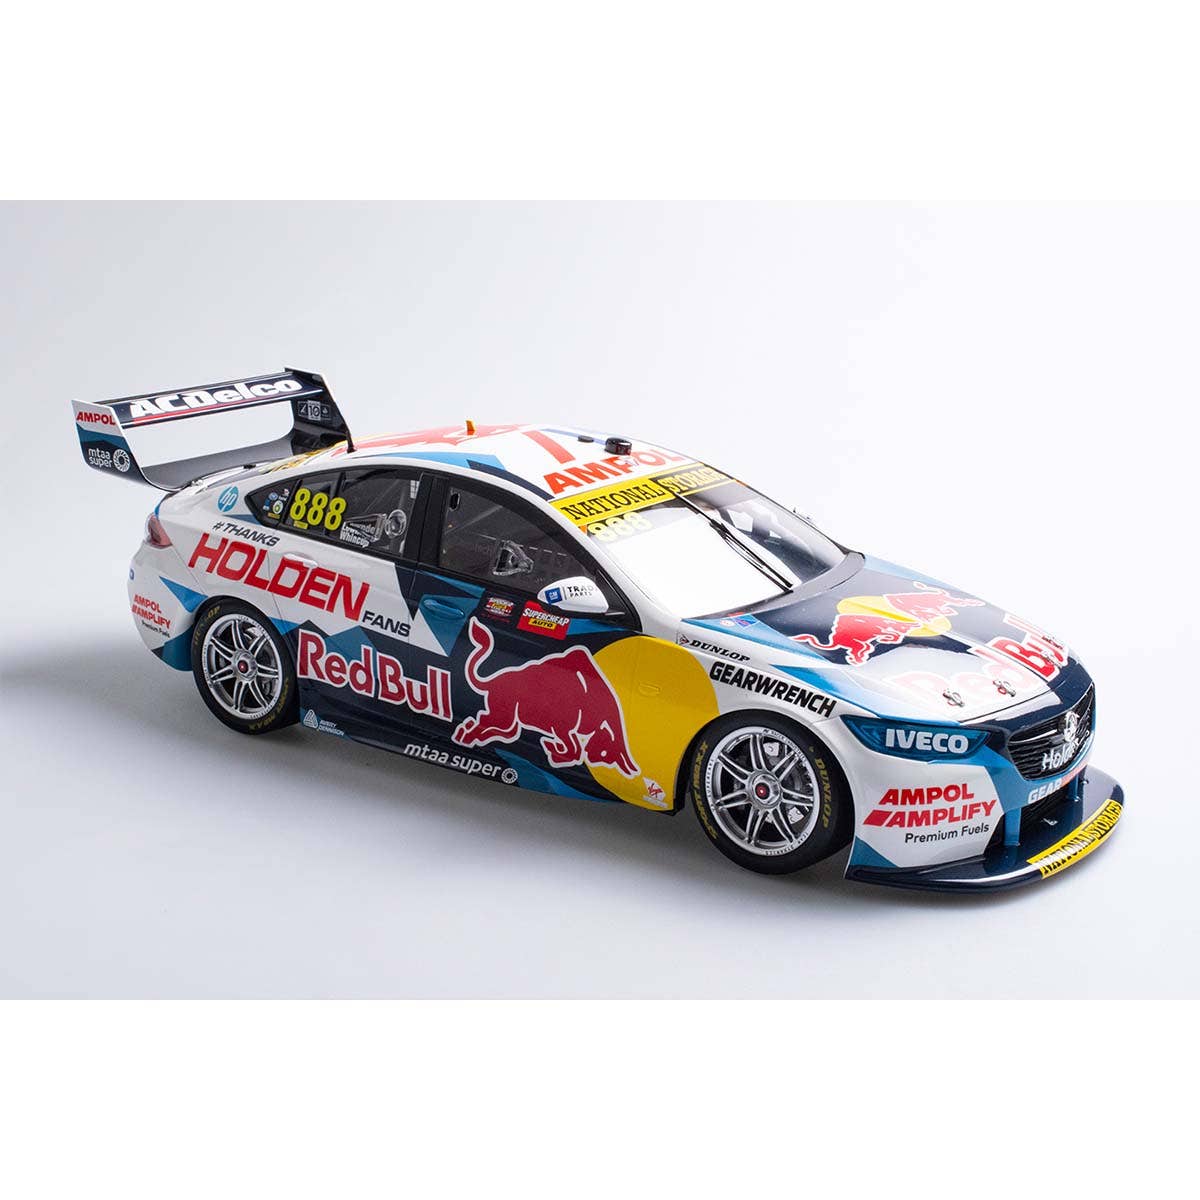 Holden ZB Commodore - Red Bull Holden Racing Team - #888, Whincup/Lowndes - , Race 31, Supercheap Auto Bathurst 1000 - Resin Model Car